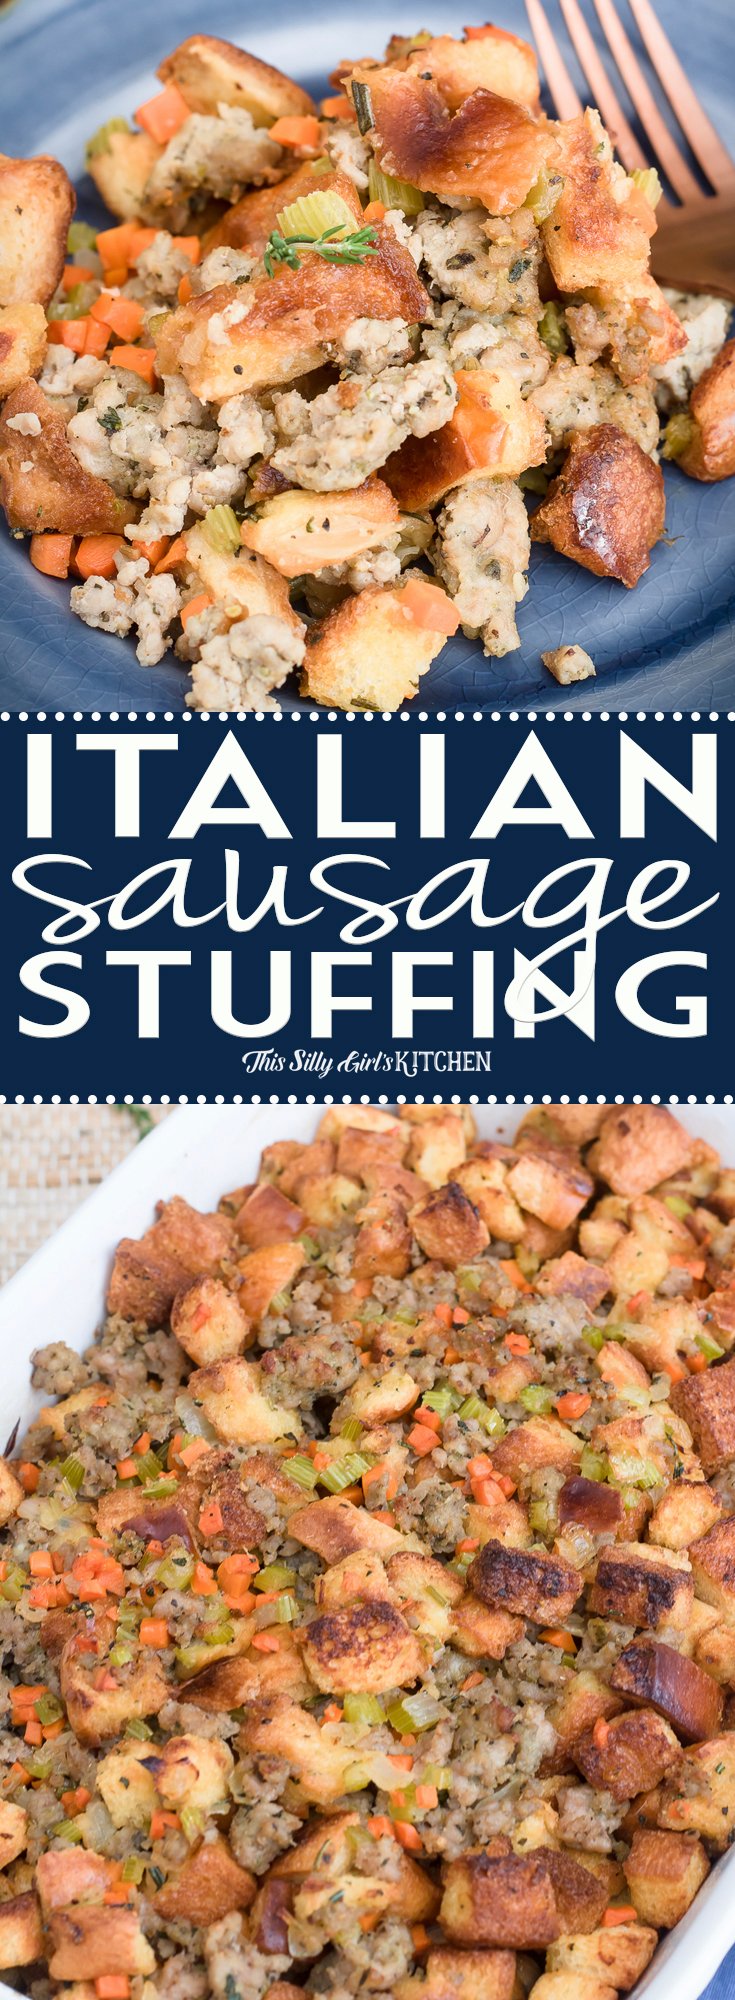 Italian Sausage Stuffing, made with homemade Italian sausage and brioche, a new family favorite! Recipe from ThisSillyGirlsKitchen.com #italiansausage #stuffing #dressing #thanksgiving